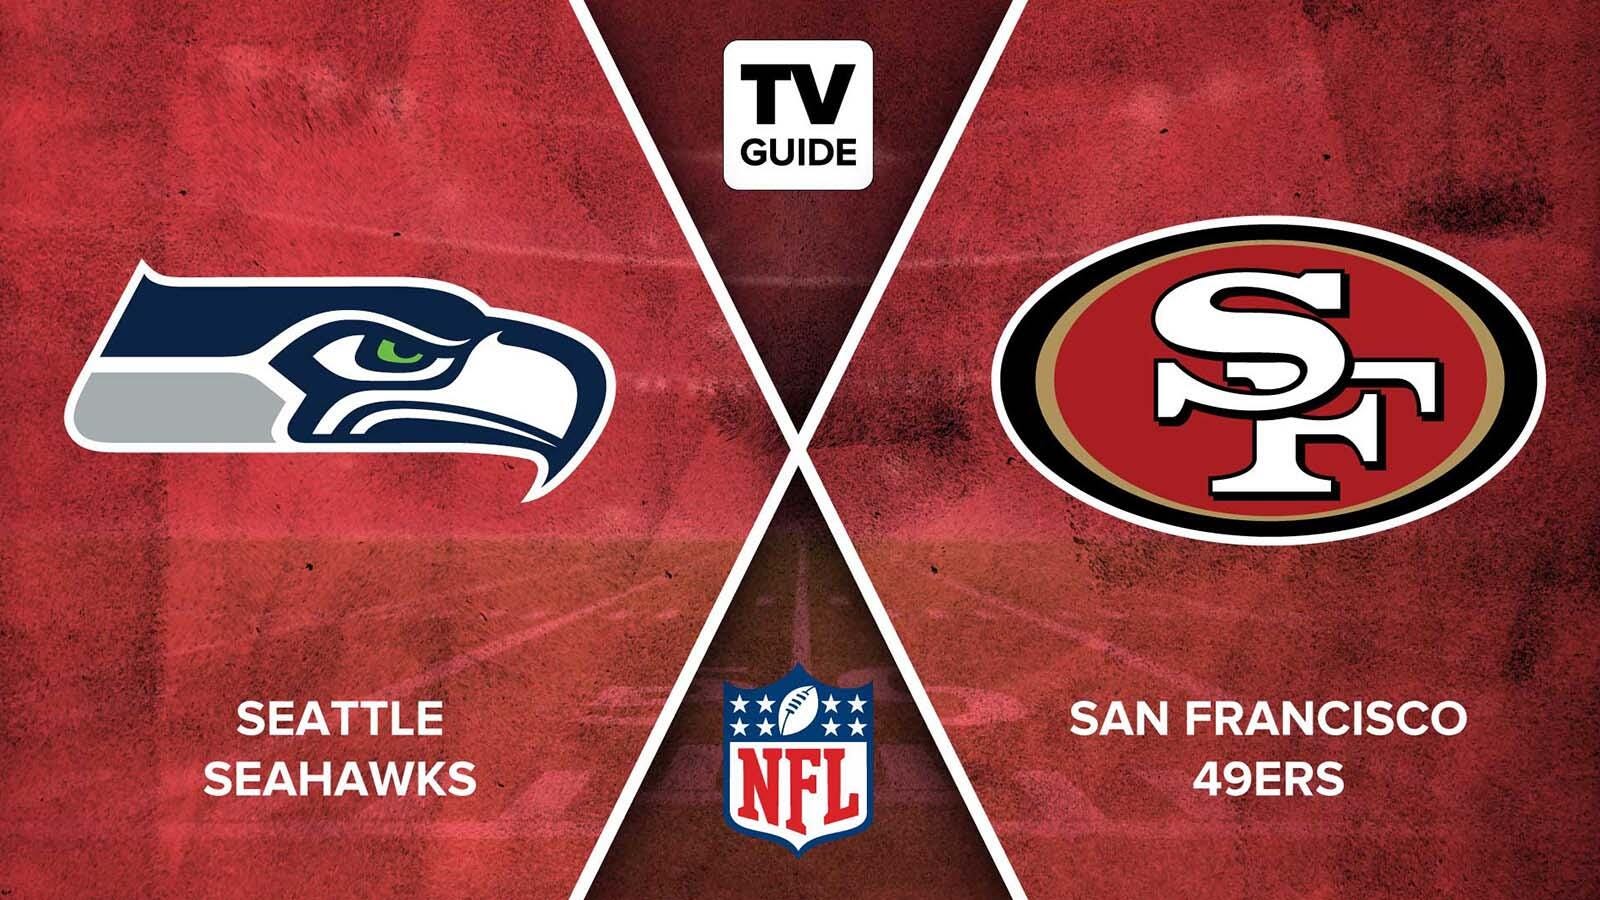 How to Watch Seahawks at 49ers Live Without Cable on January 14 - TV Guide